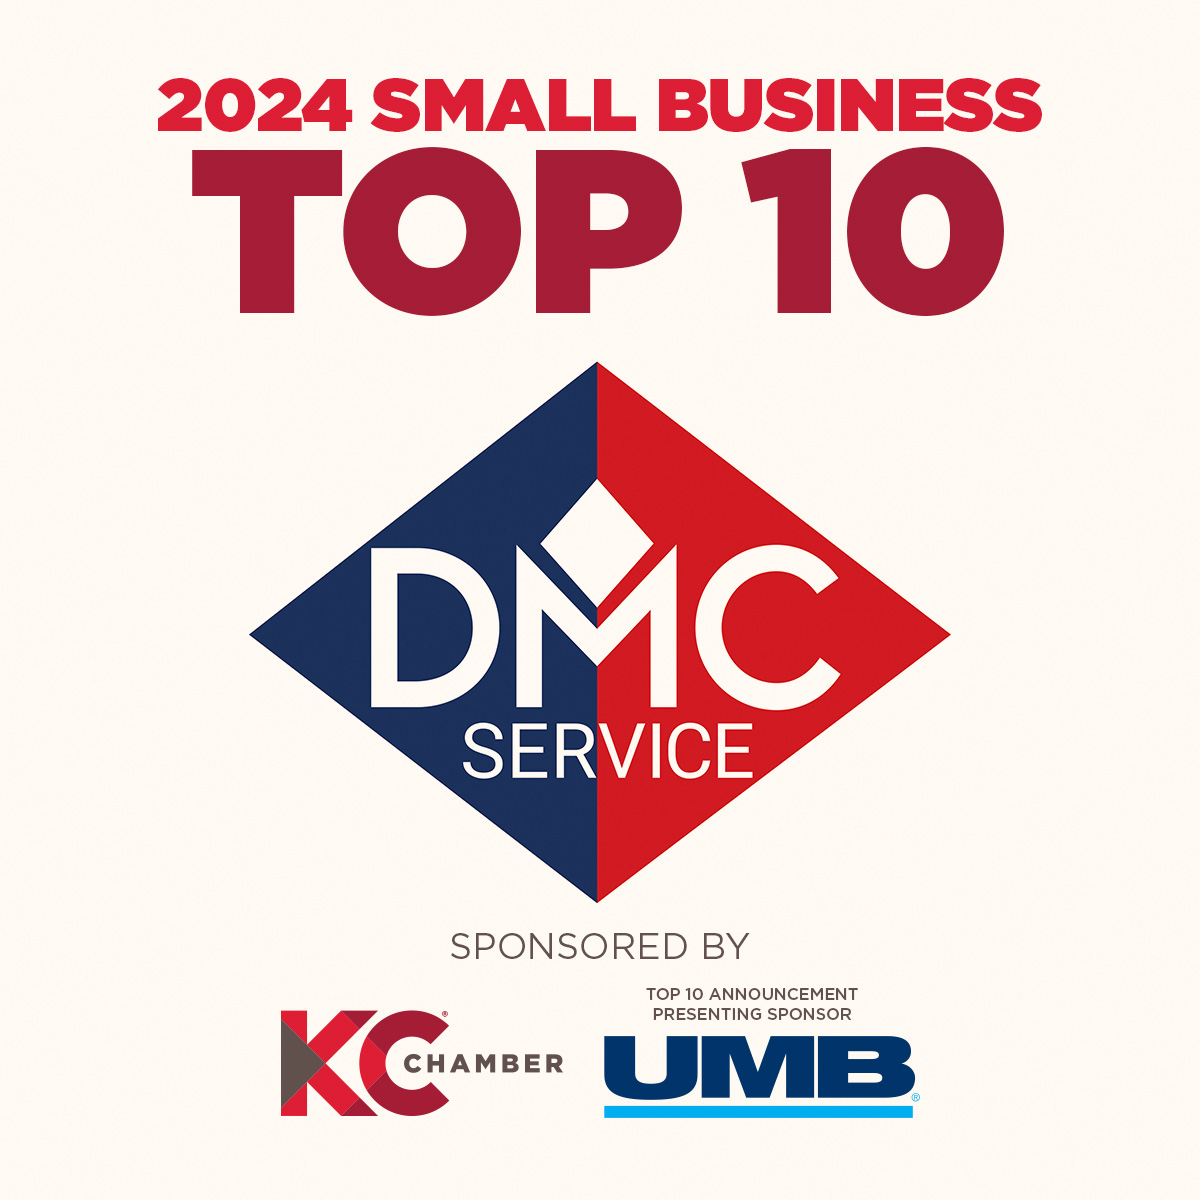 Time for a pulse check! With just two more small businesses to be announced, how are everyone’s nerves? Let’s relieve a bit of anxiety by revealing that DMC Service, Inc. is on the list of Top 10 Small Businesses for 2024. #CelebrateSmallBiz